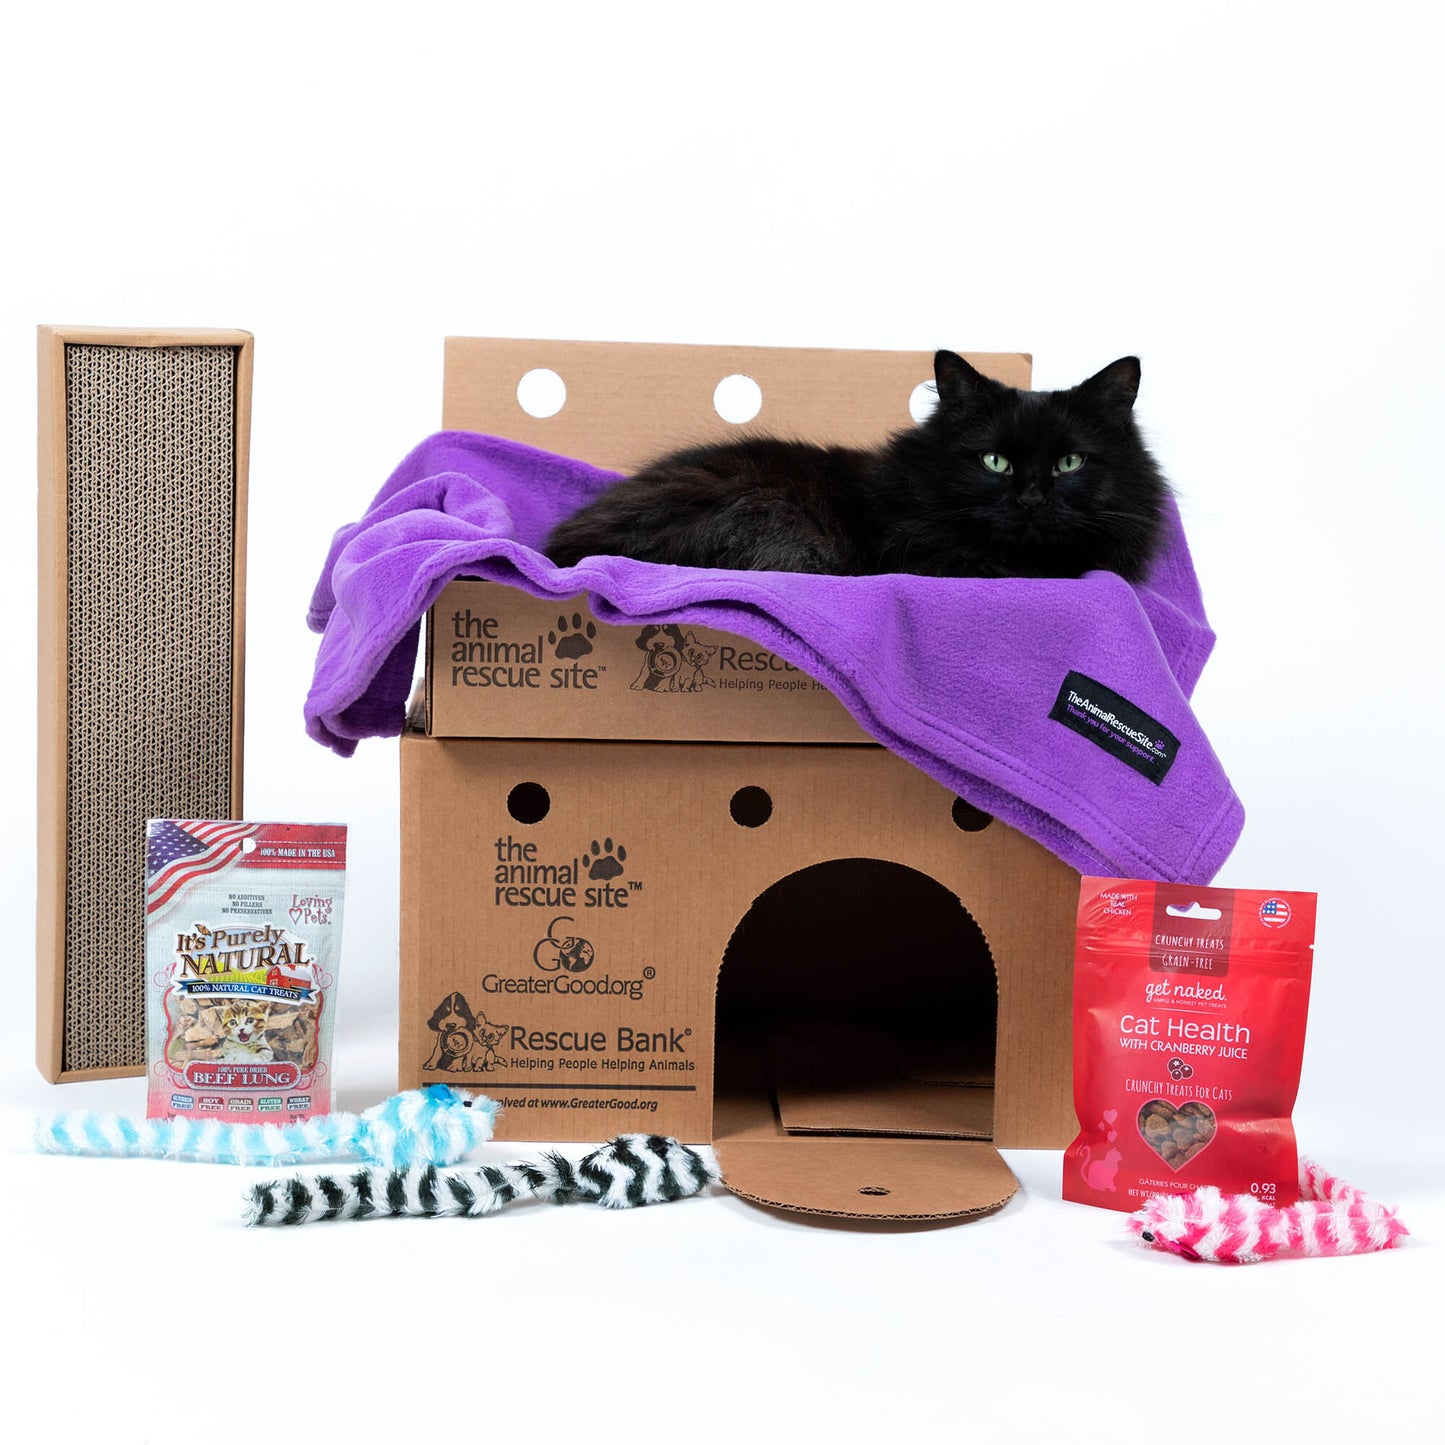 Crazy for Cats: Provide Essentials for Cats & Kittens In Need